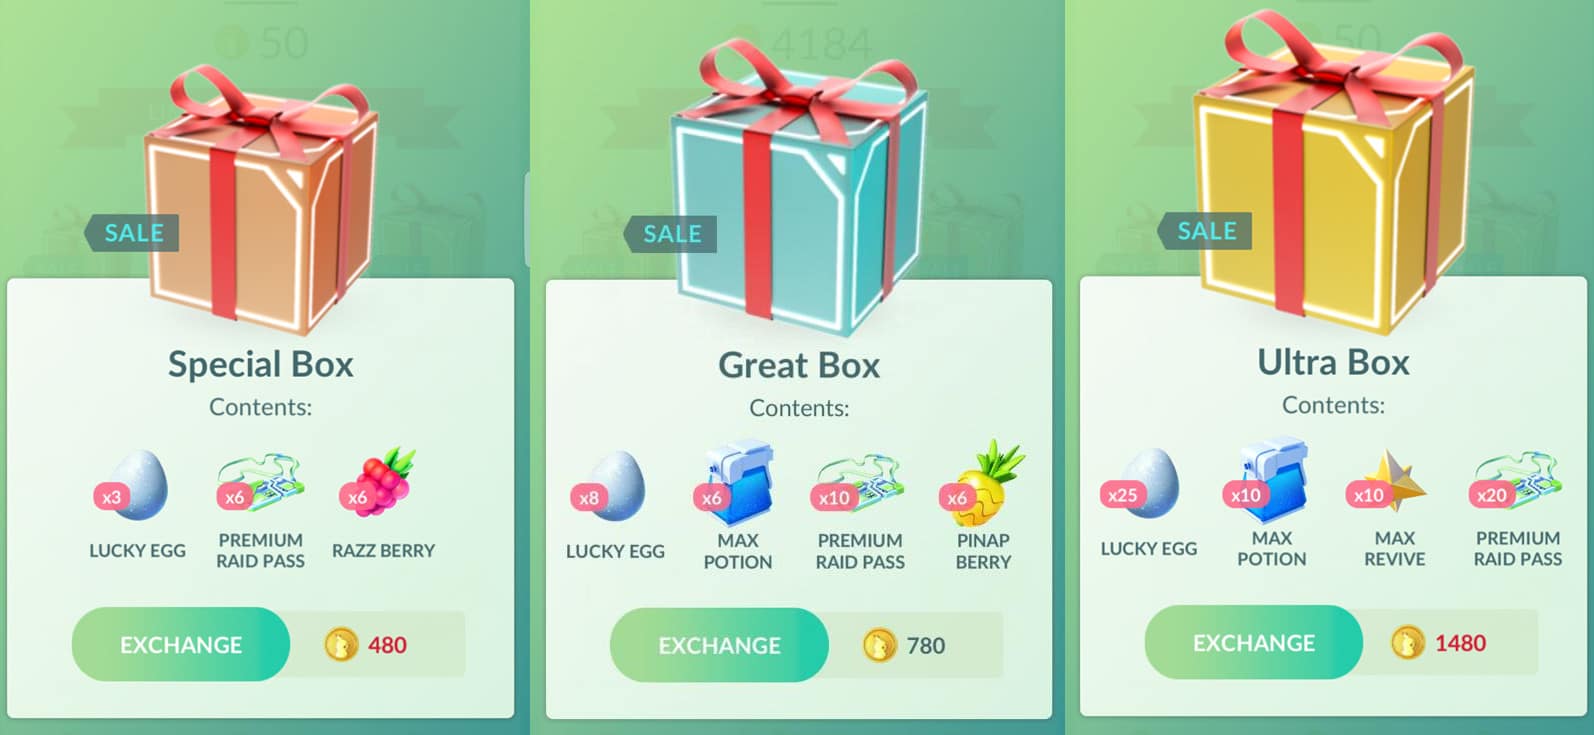 new special great ultra box sale